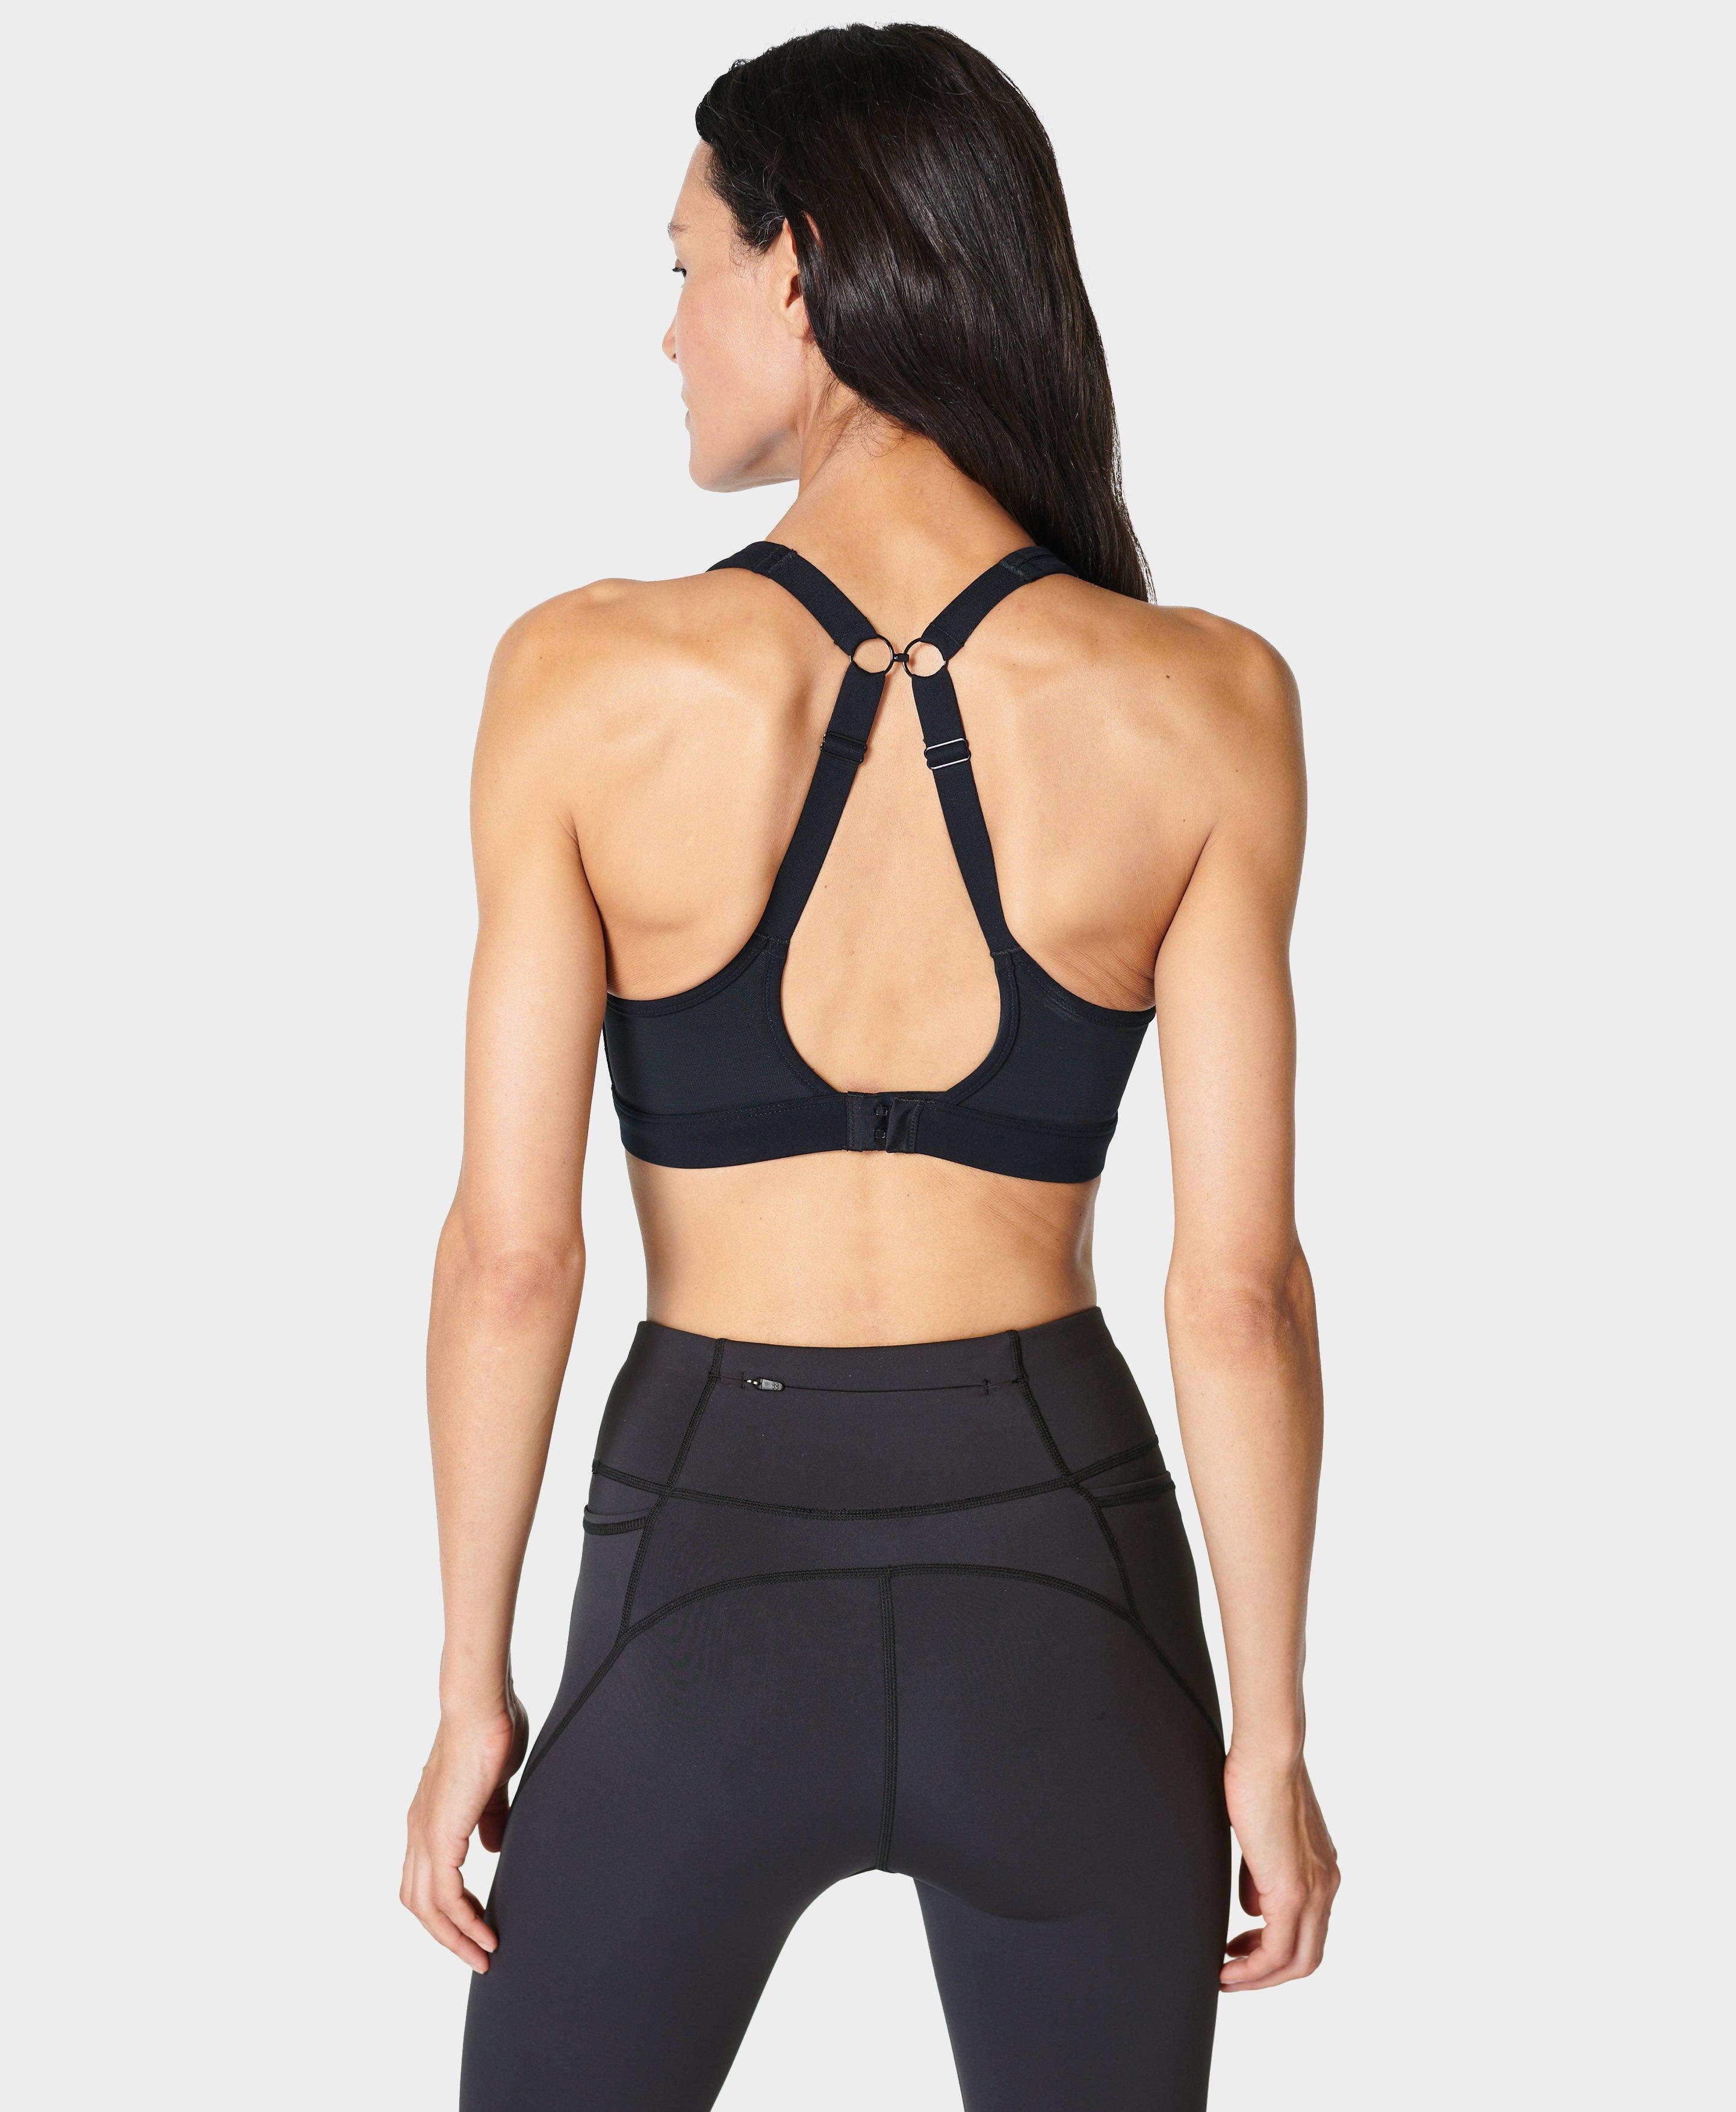 Sweaty Betty's New Power Icon Sports Bras Are What Active Girls Everywhere  Have Been Waiting For